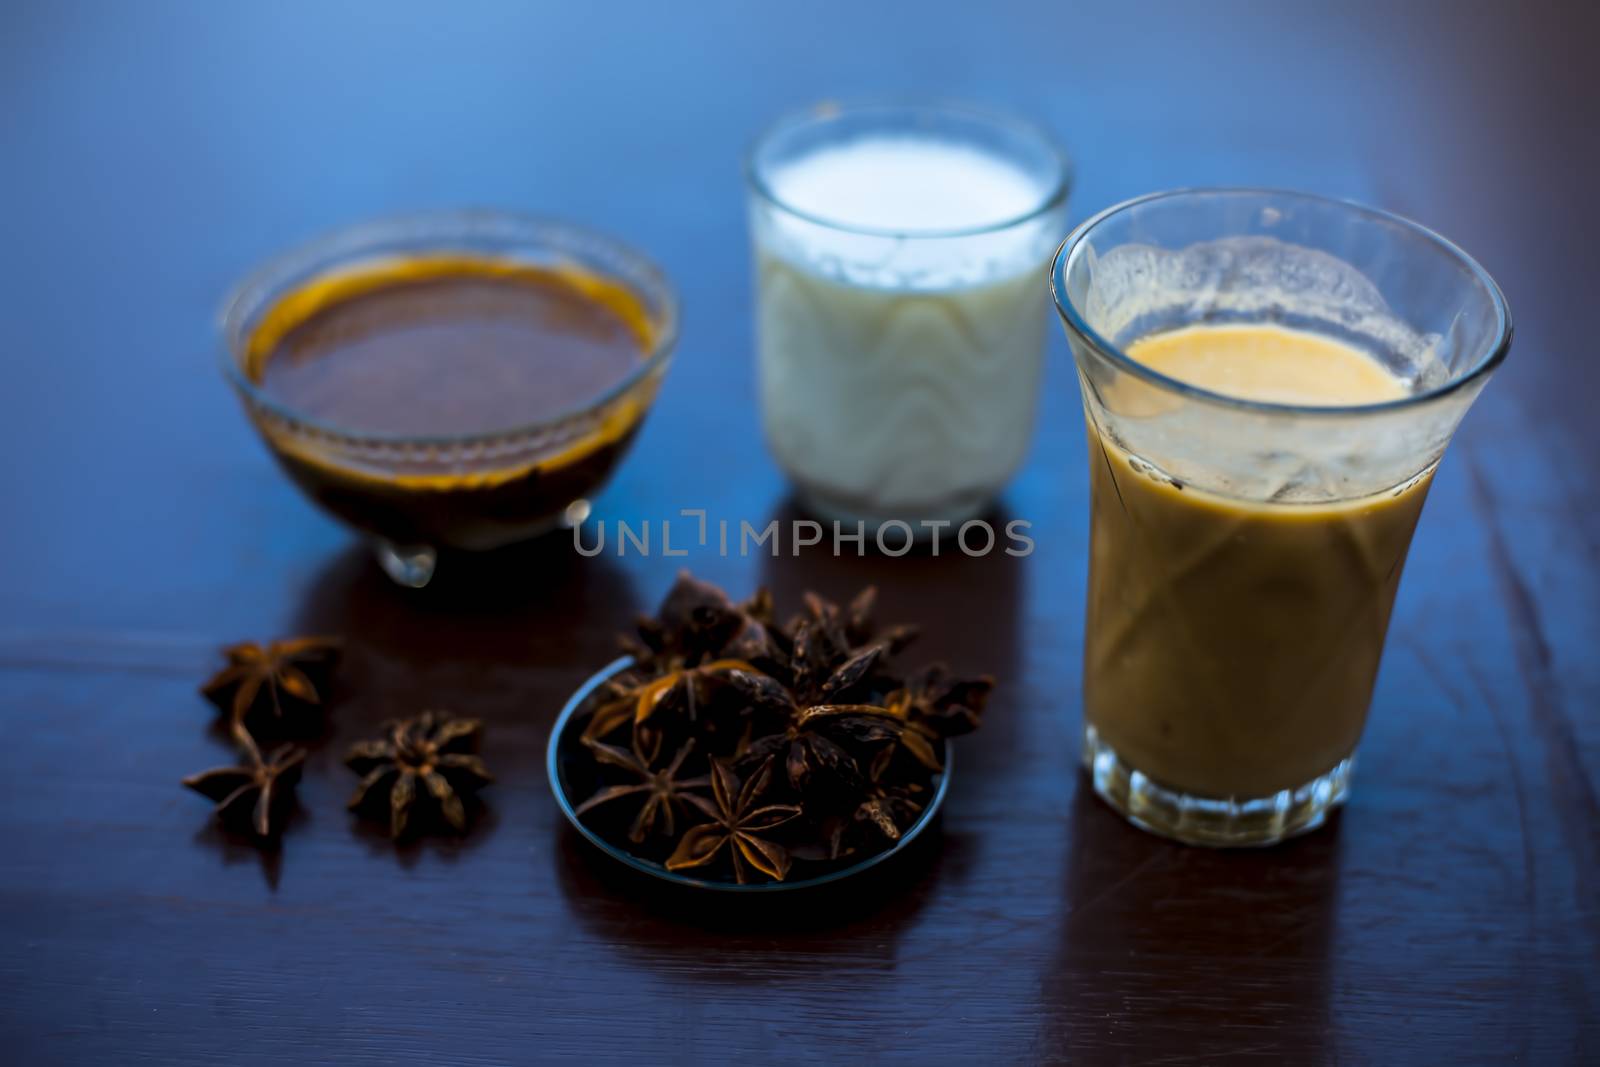 Close up shot of a glass of Star Anise Milk consisting of some star anise powder, milk, and licorice powder. Horizontal shot.